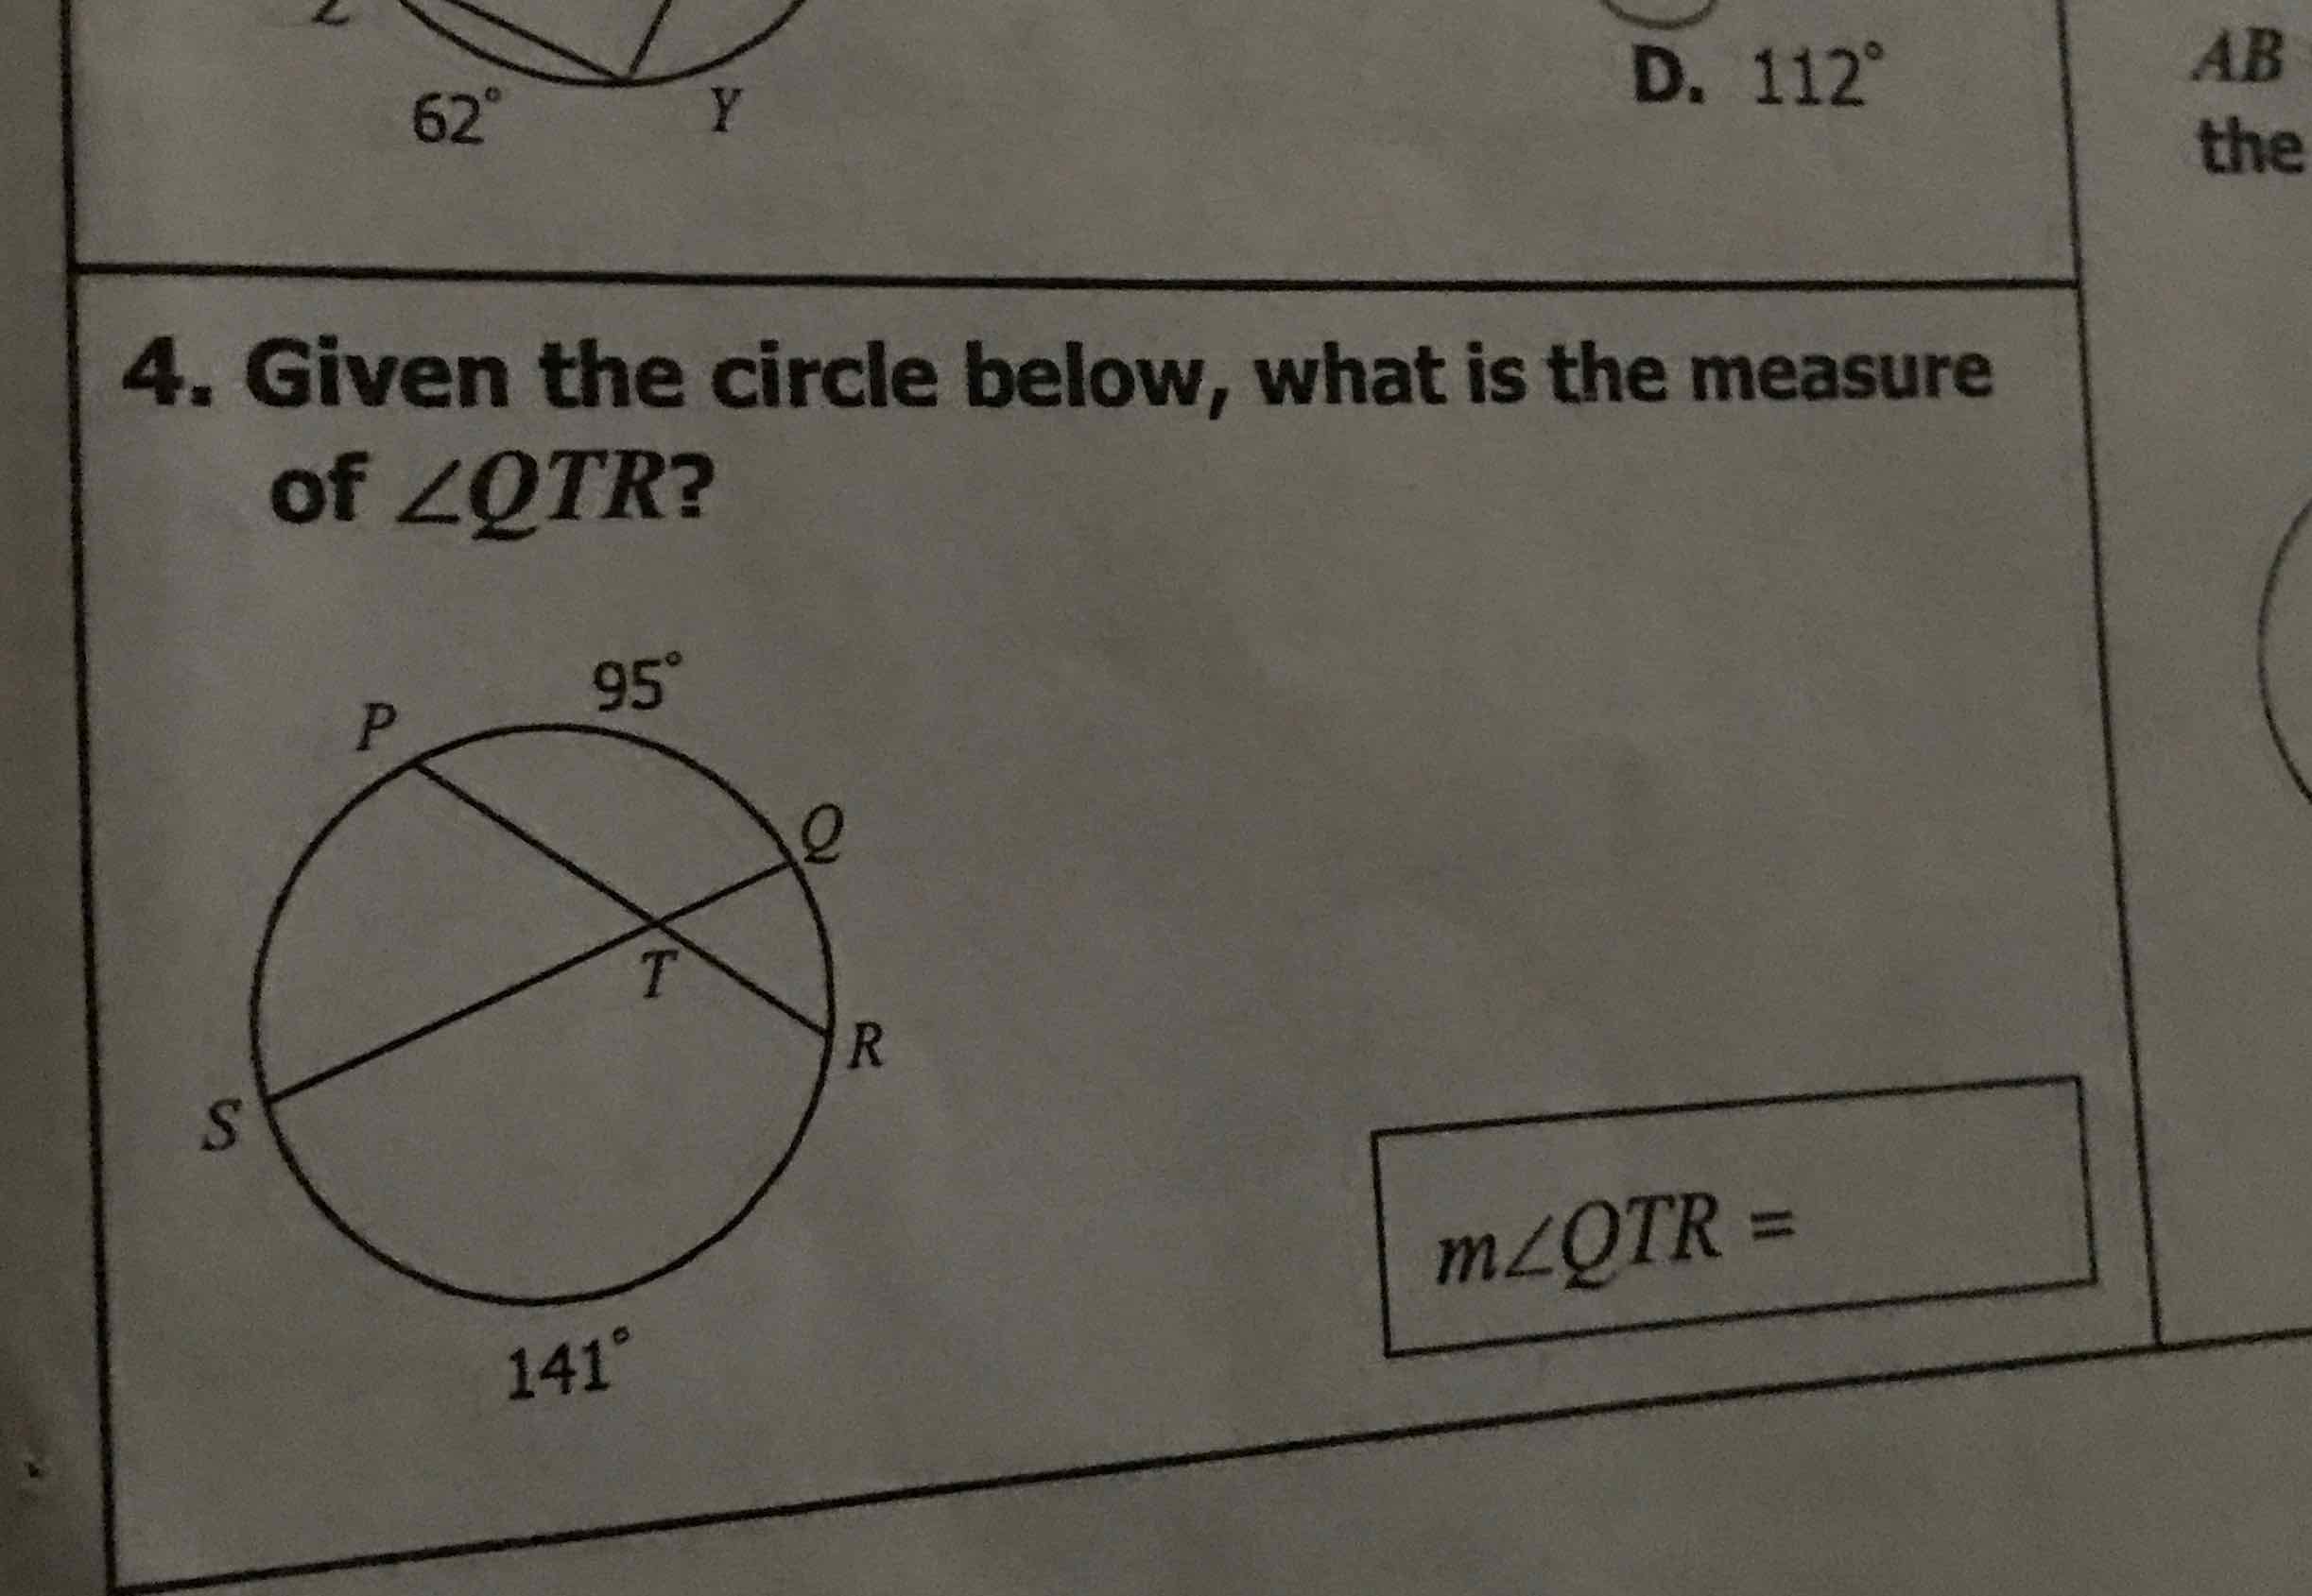 4. Given the circle below, what is the measure of \( \angle Q T R ? \)
\( m \angle Q T R= \)